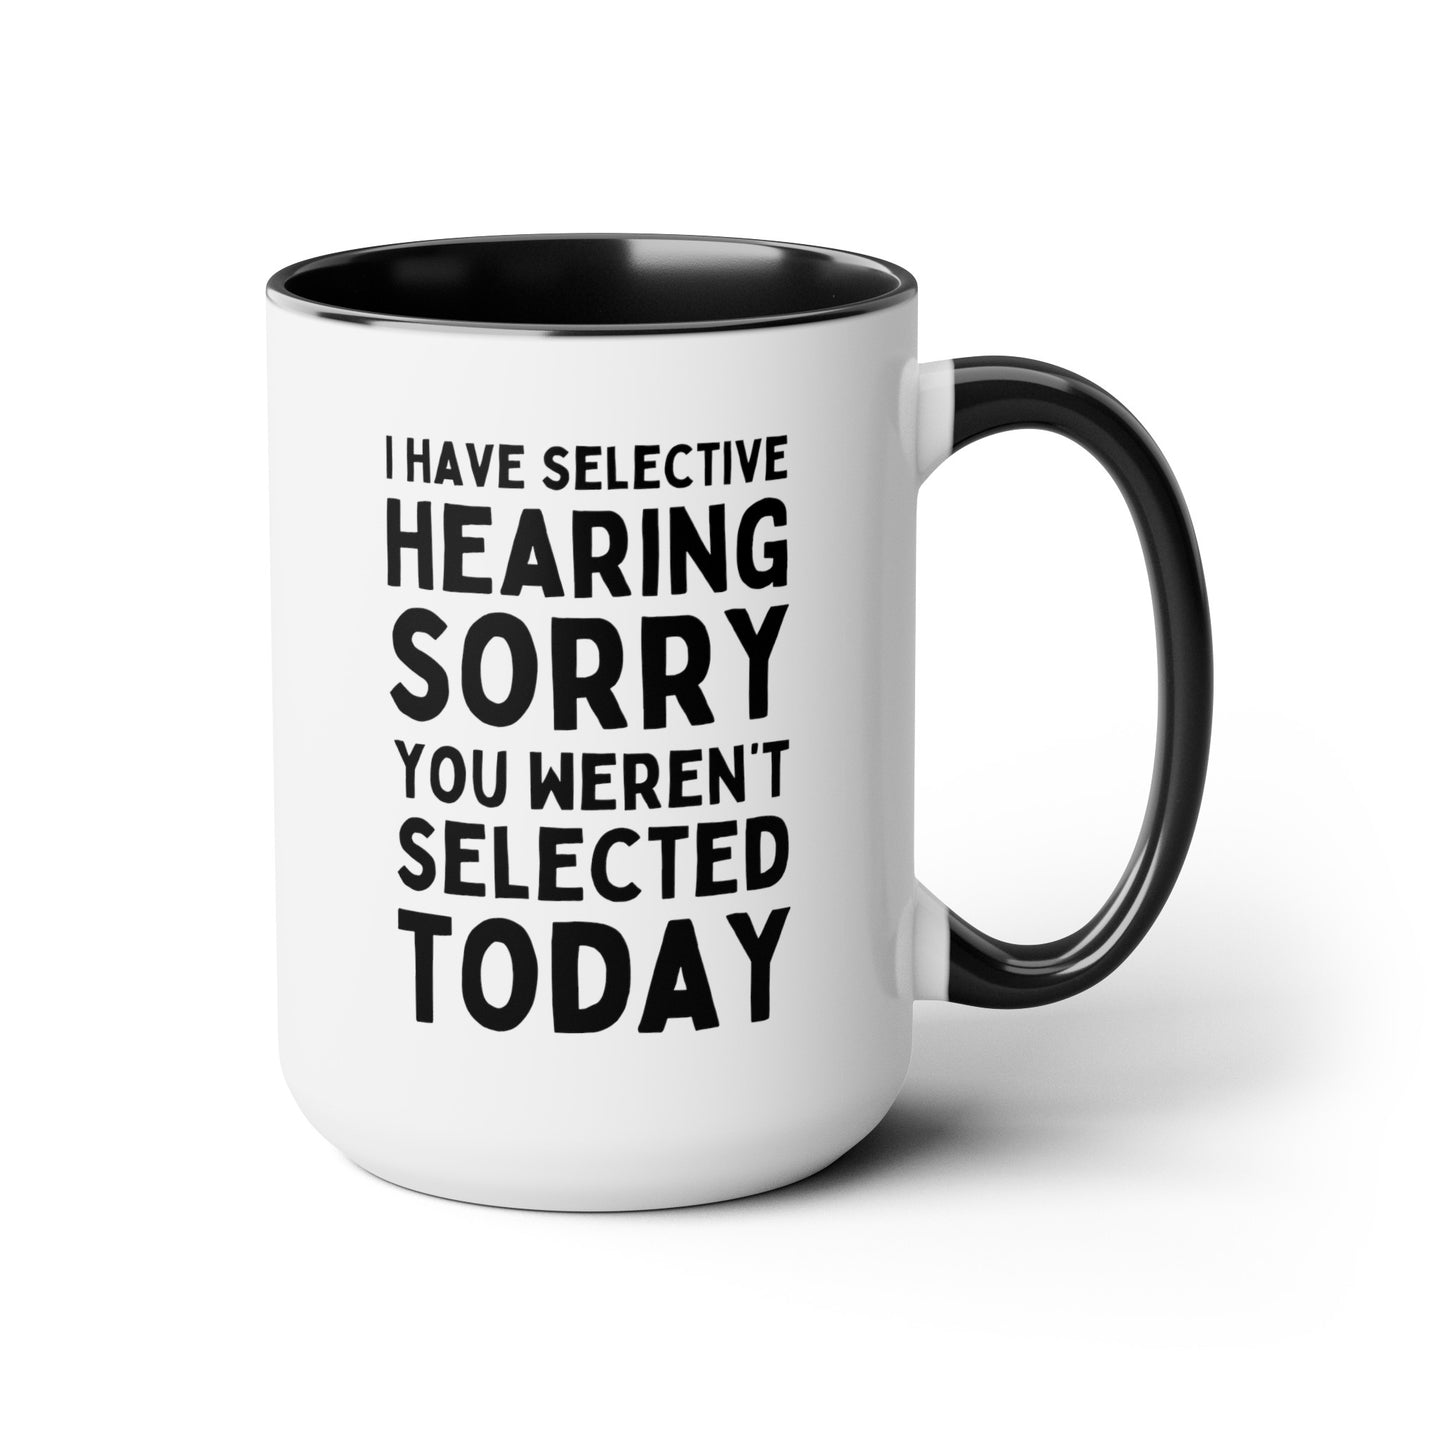 I Have Selective Hearing Sorry You Weren't Selected Today 15oz white with black accent funny large coffee mug gift for coworker antisocial sarcasm snarky rude office colleague asocial waveywares wavey wares wavywares wavy wares